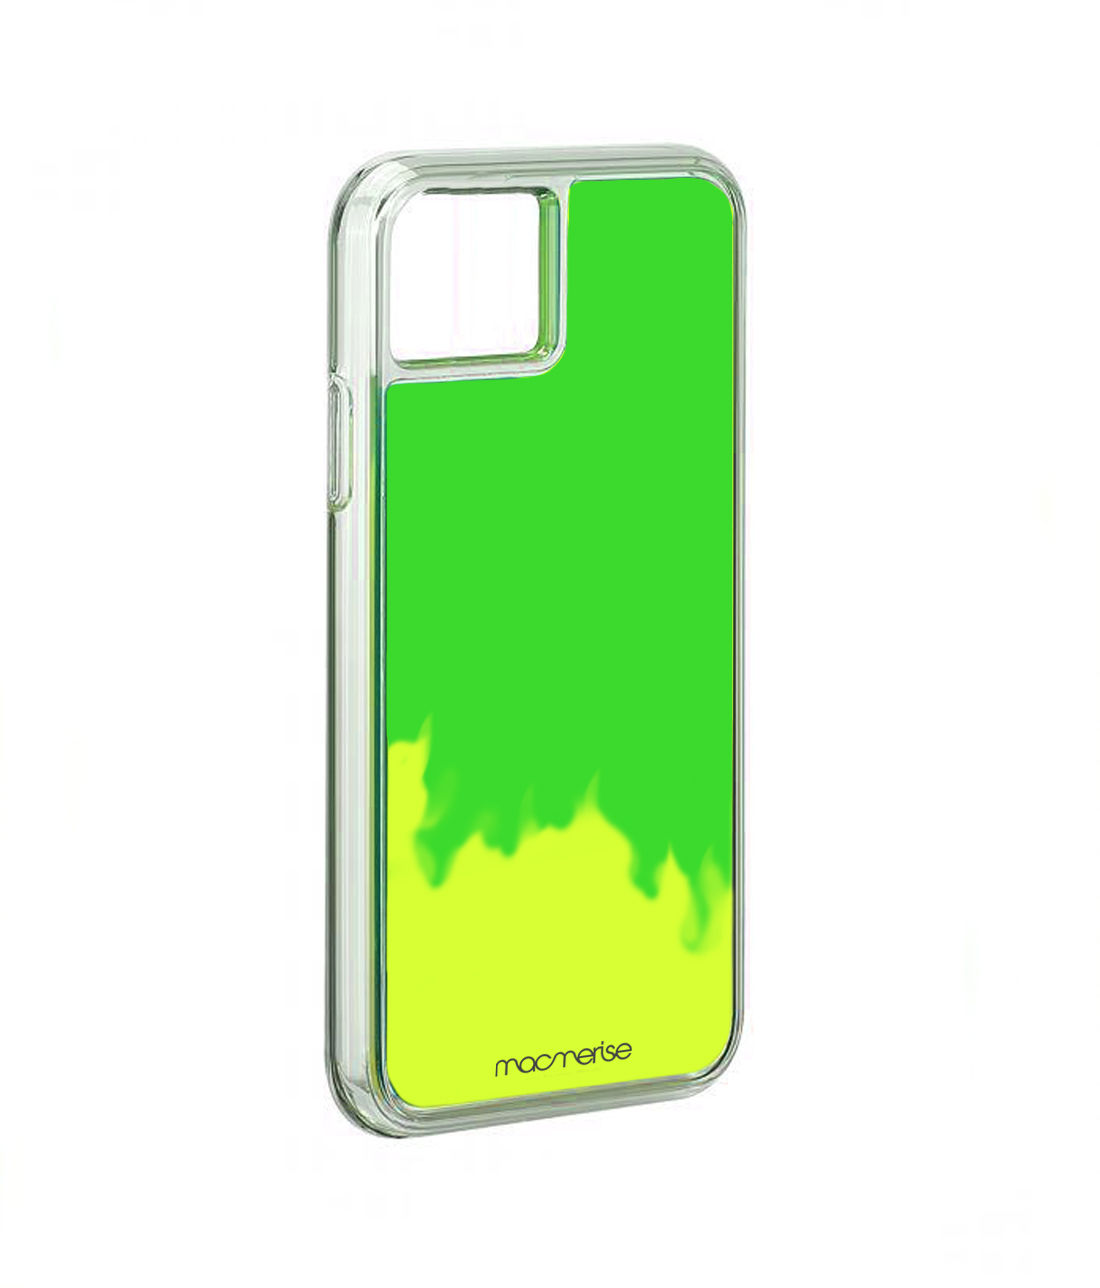 Neon Sand Green - Neon Sand Case for iPhone 12 Pro Max